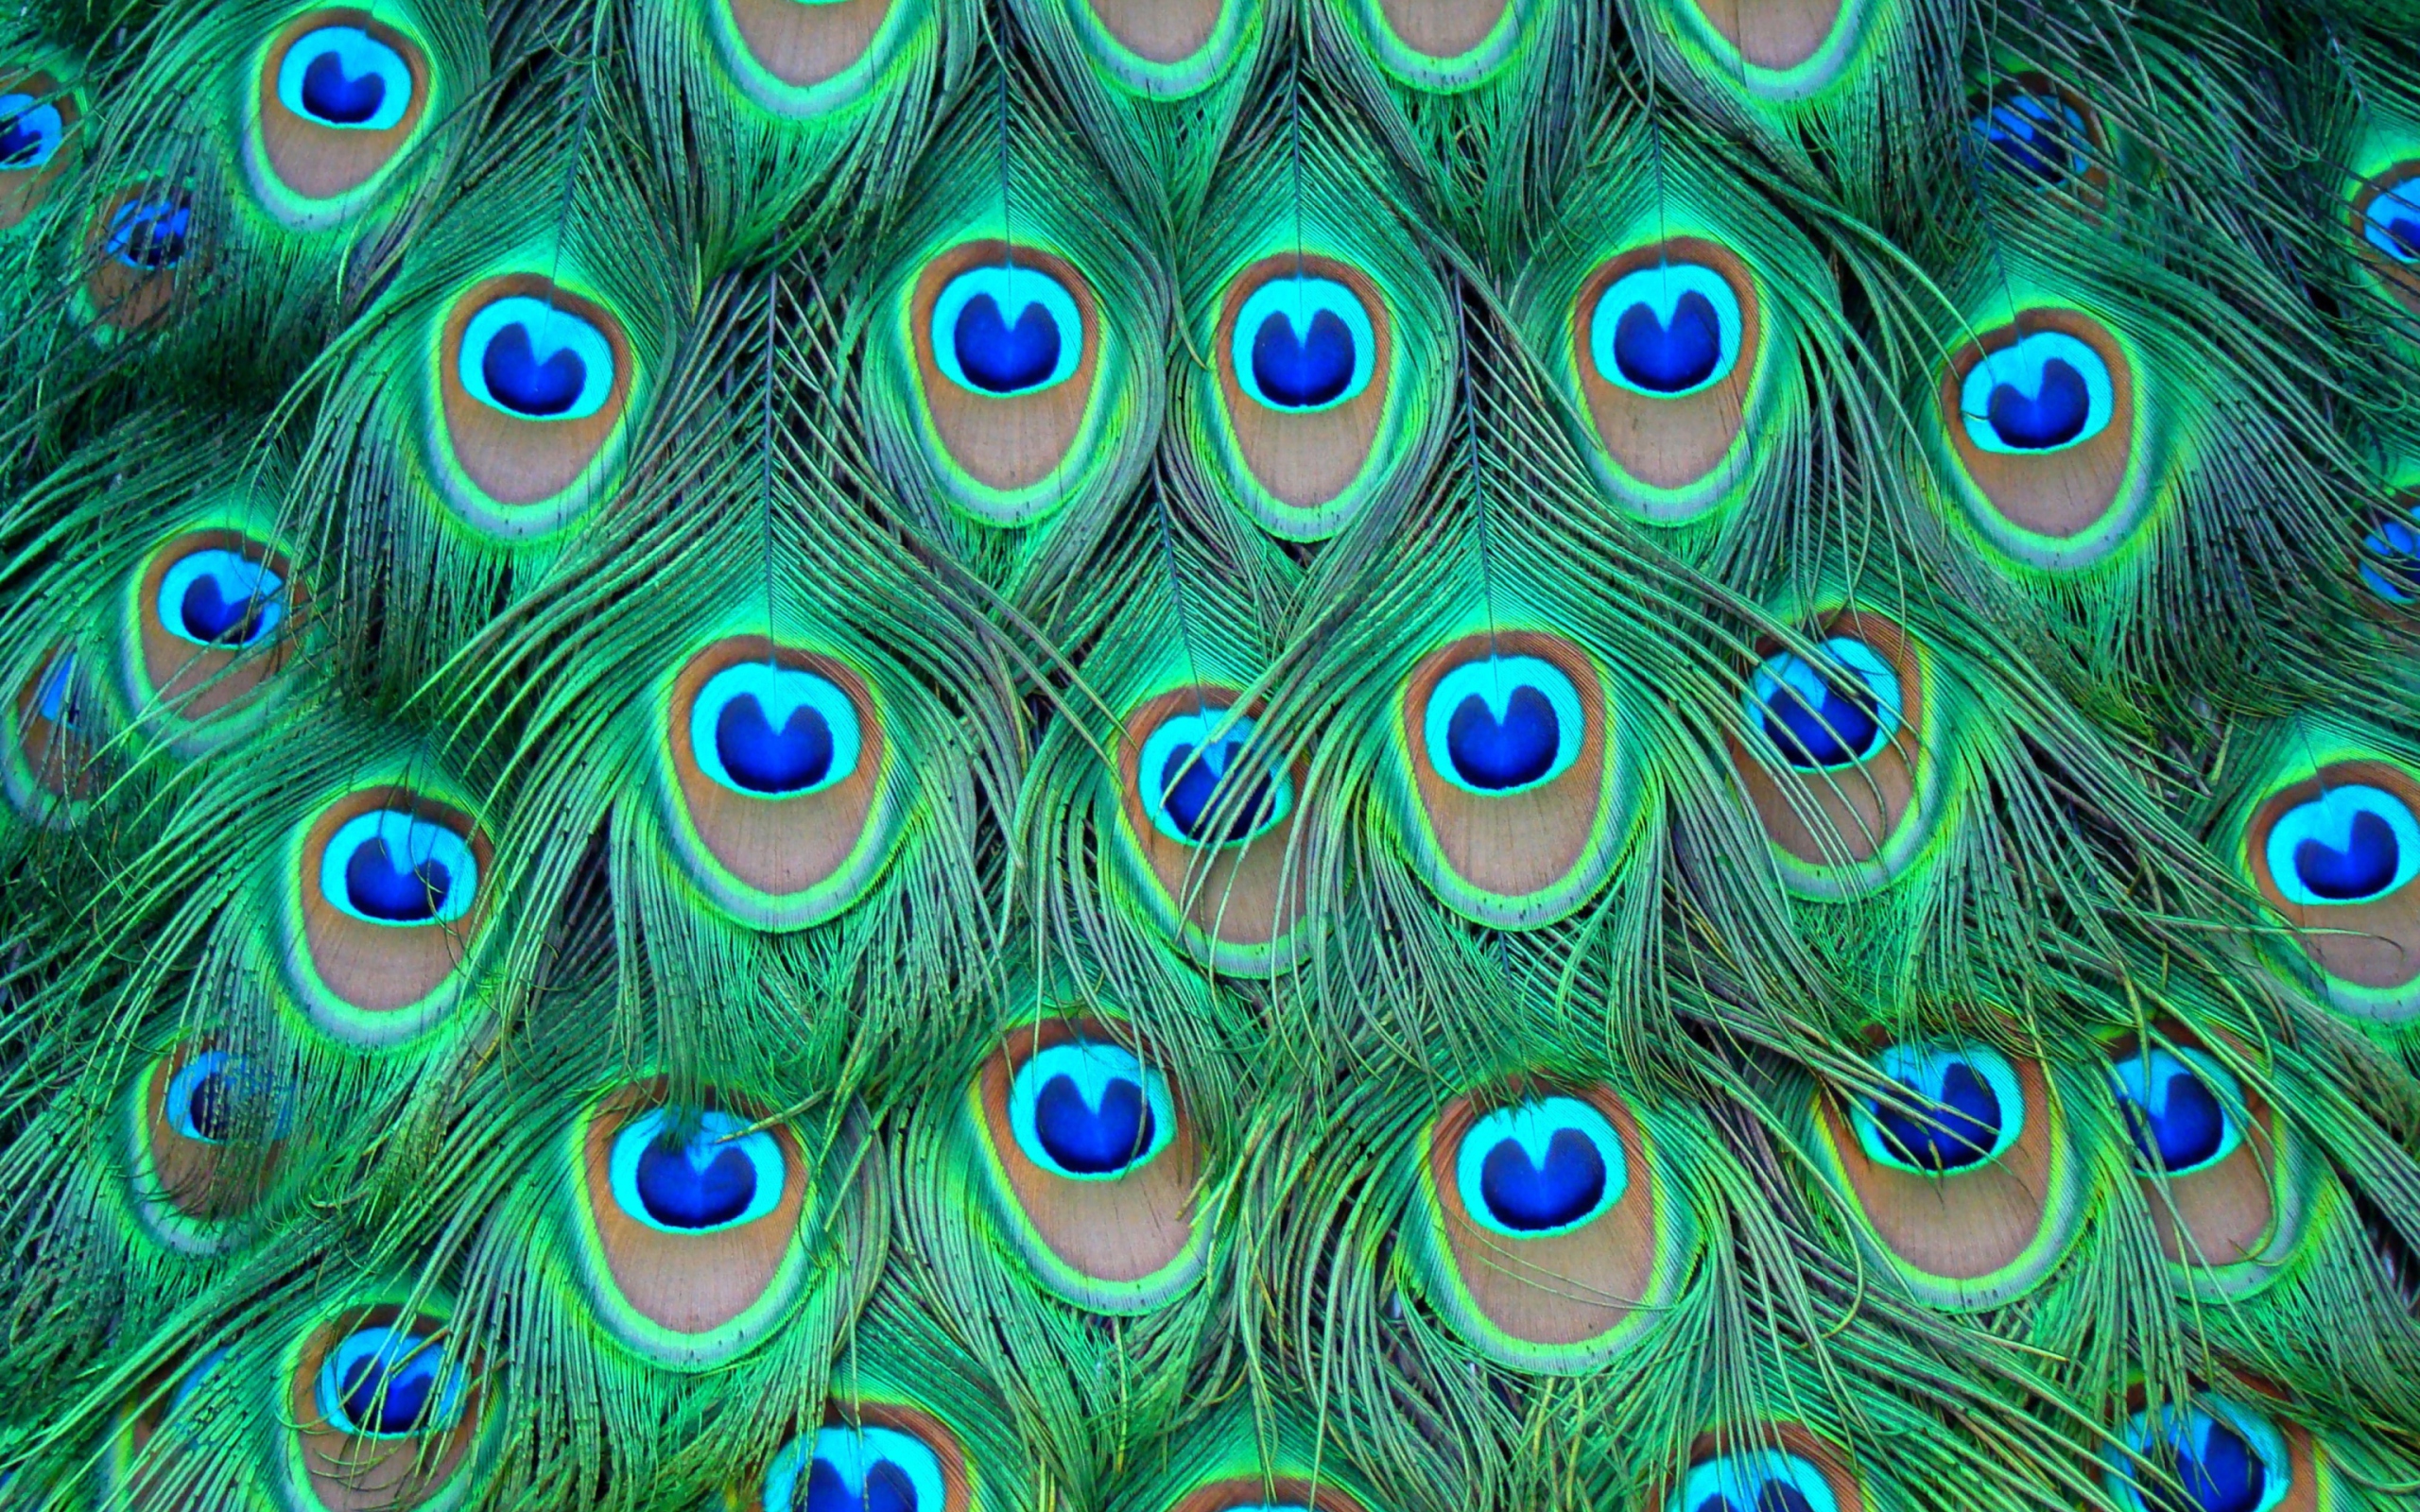 Peacock Feathers wallpaper 2560x1600